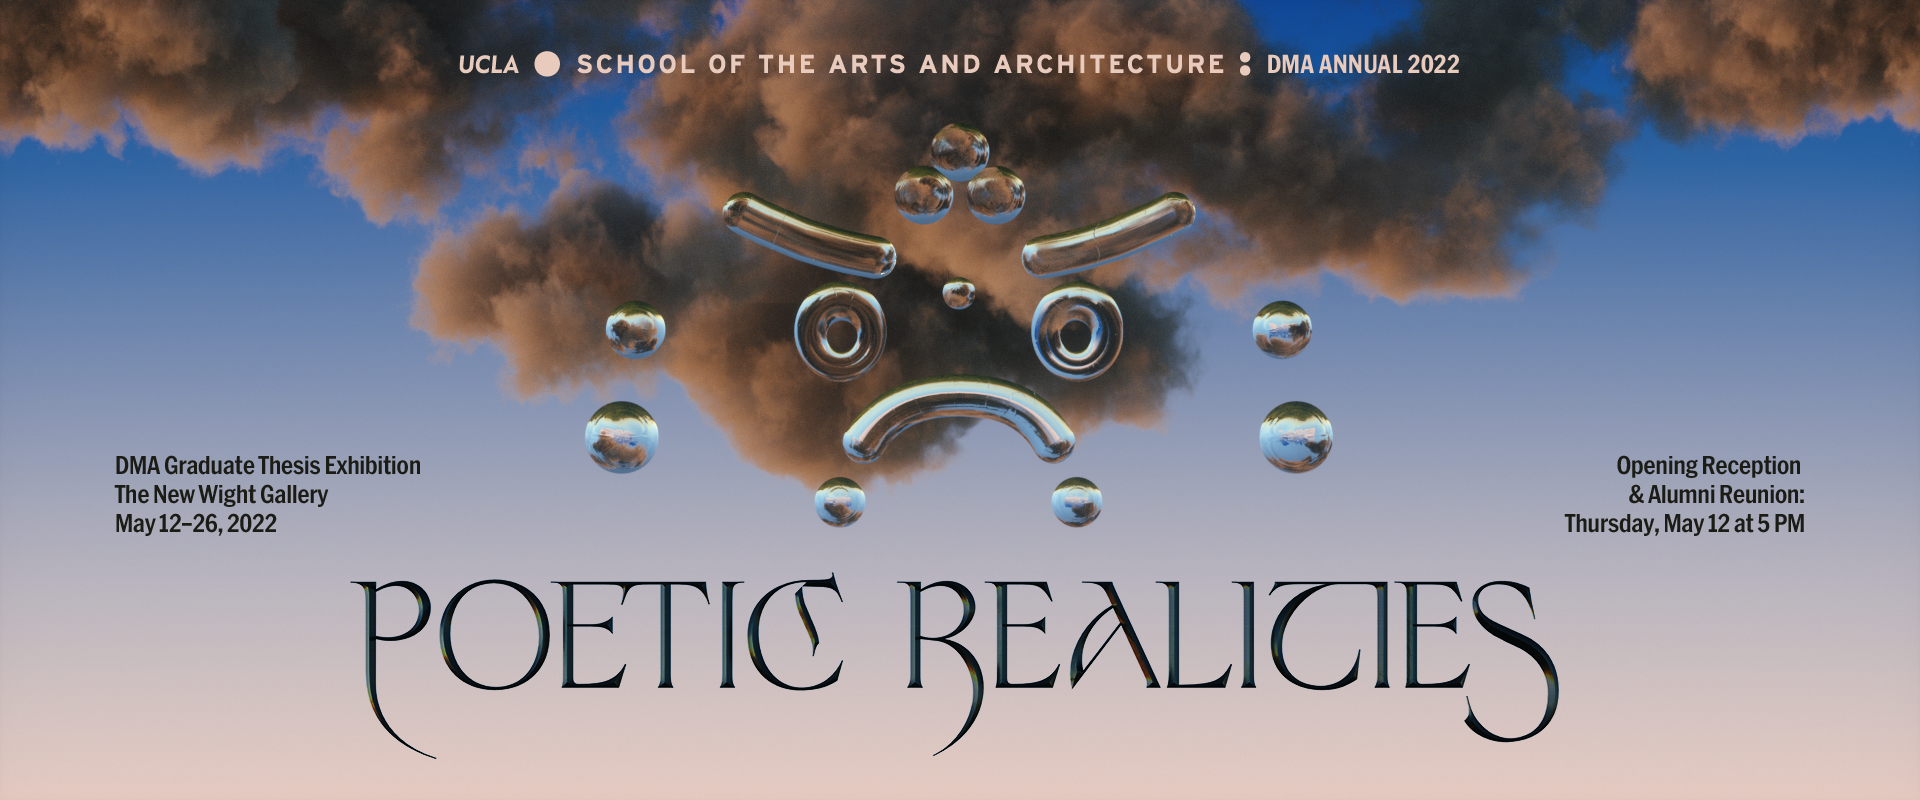 An image of clouds with a rendered emoji in mirror. Text reads "Poetic Realities"